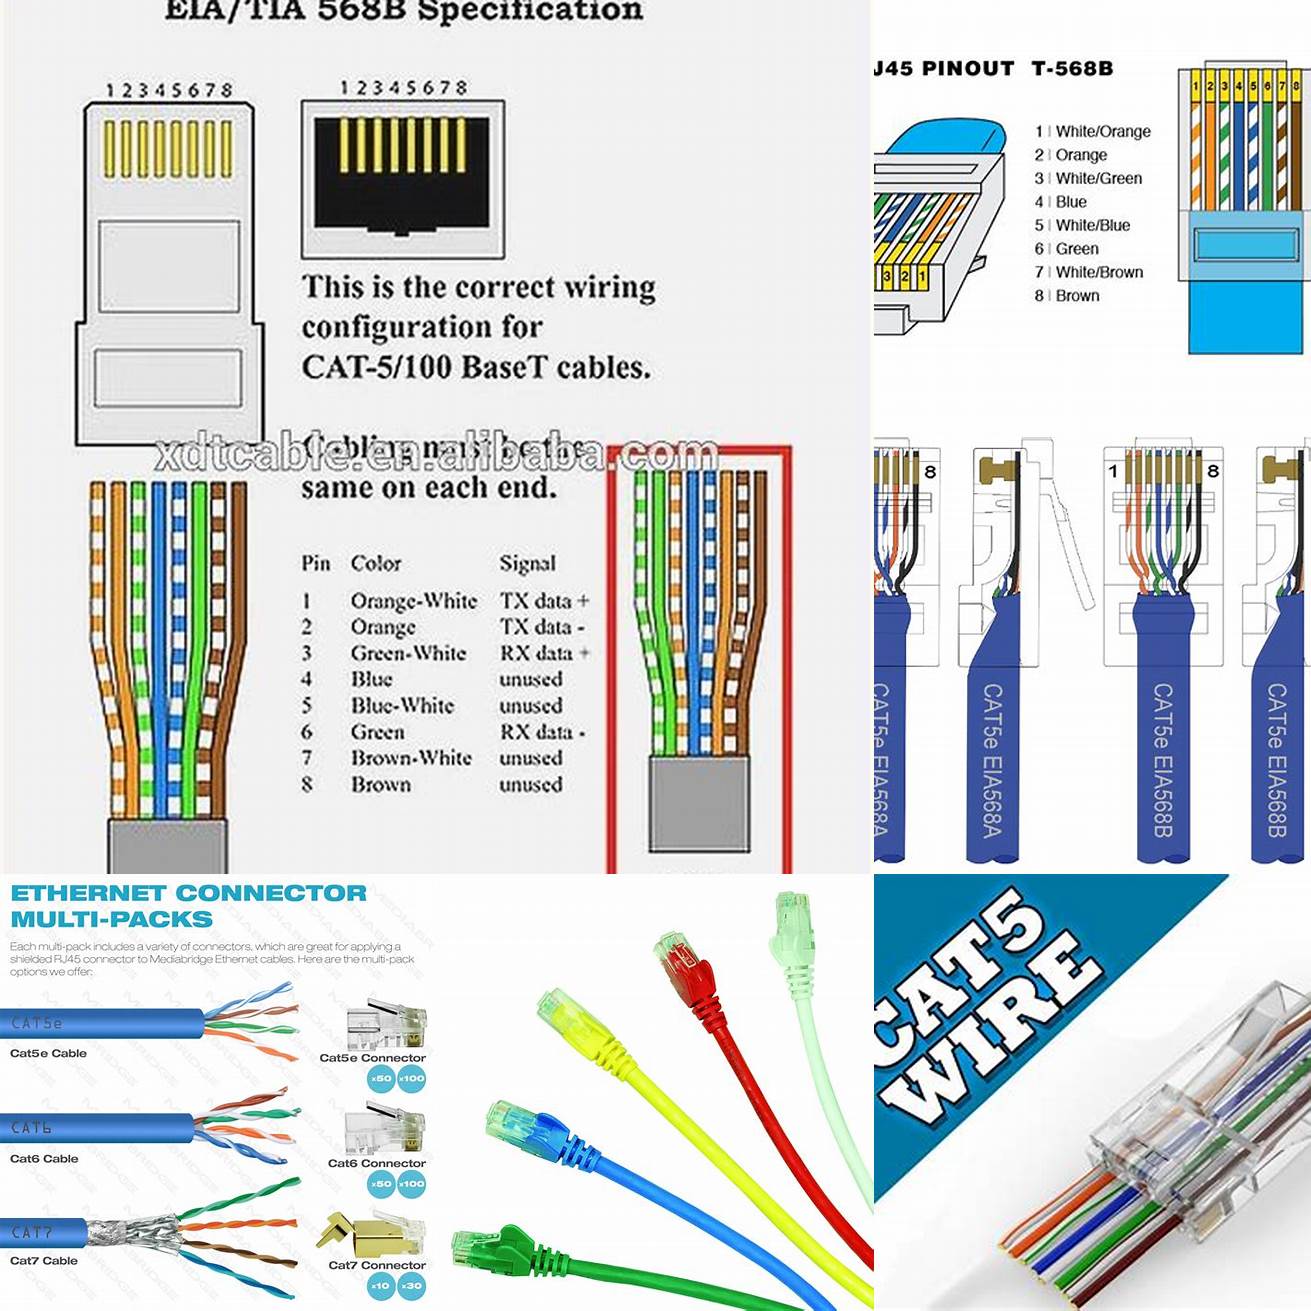 Use shorter patch cables and minimize the number of connectors